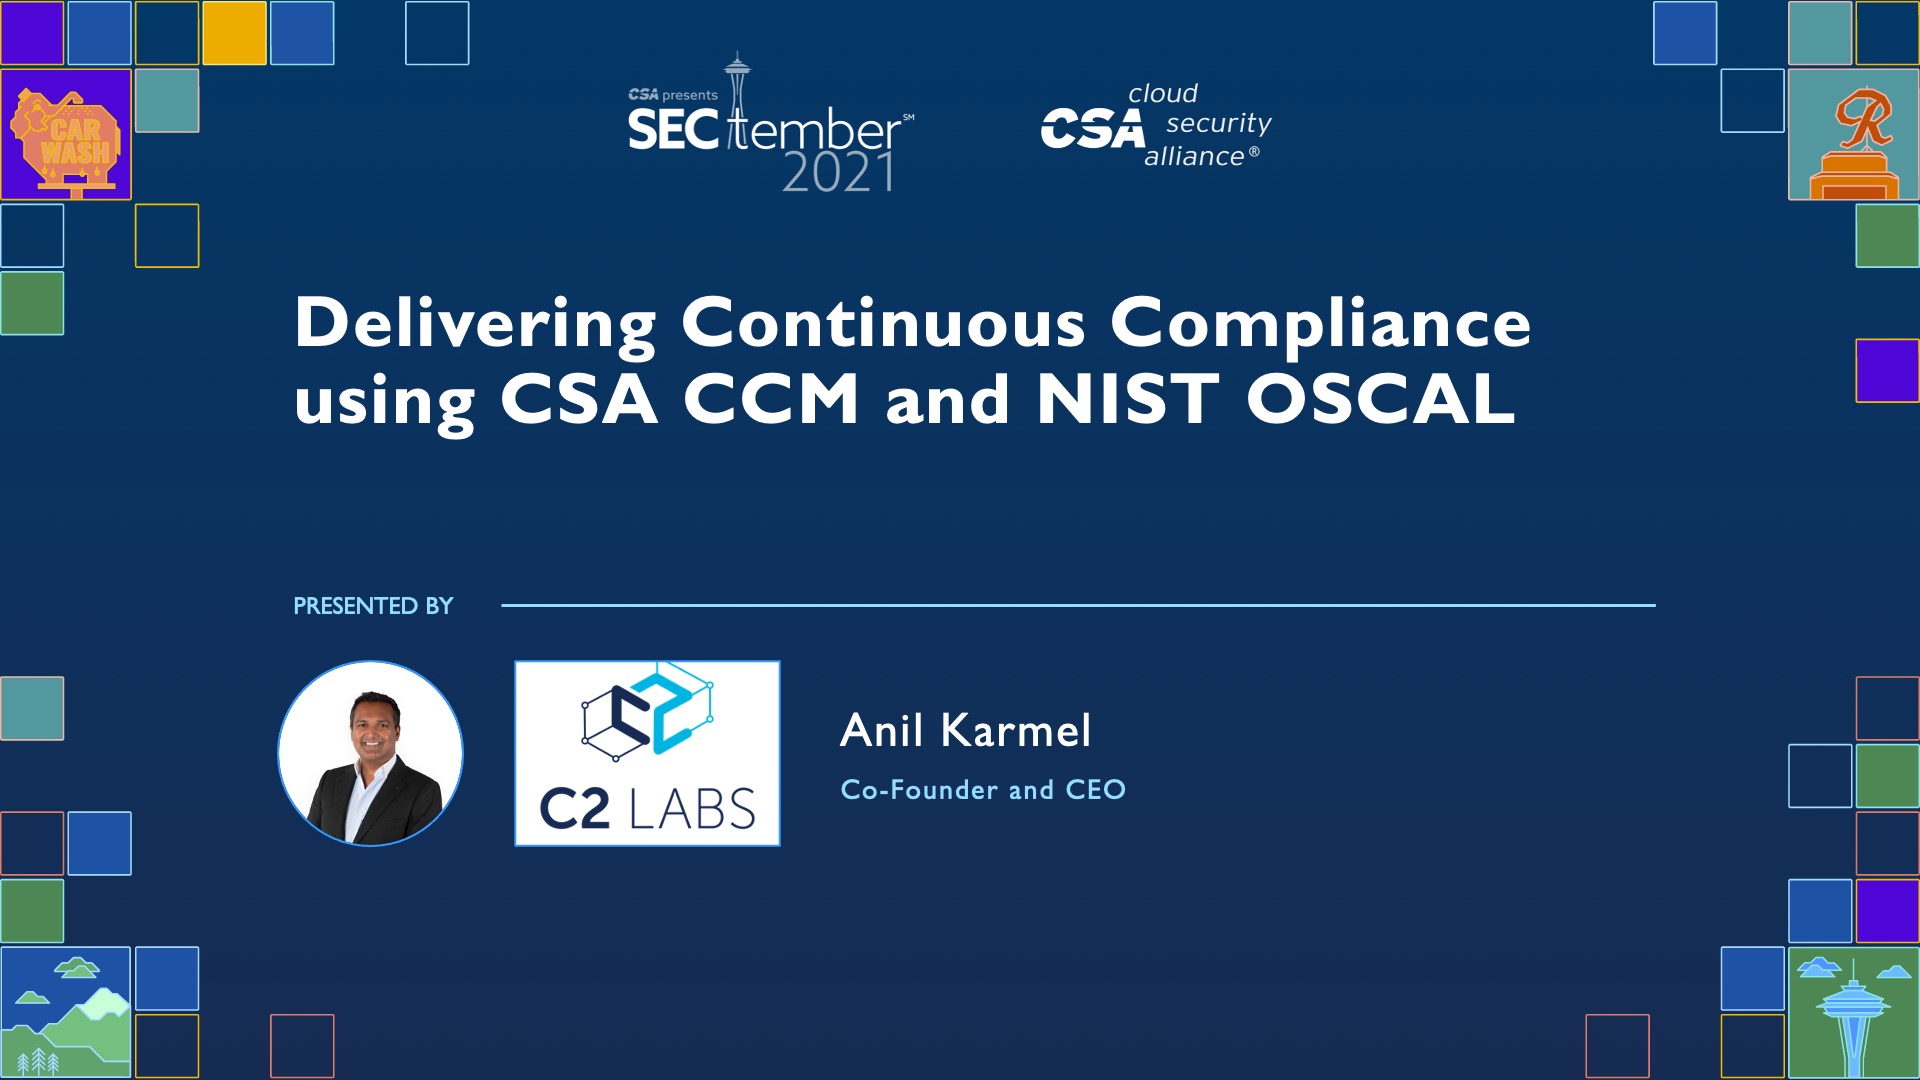 Delivering Continuous Compliance using CSA CCM and NIST OSCAL